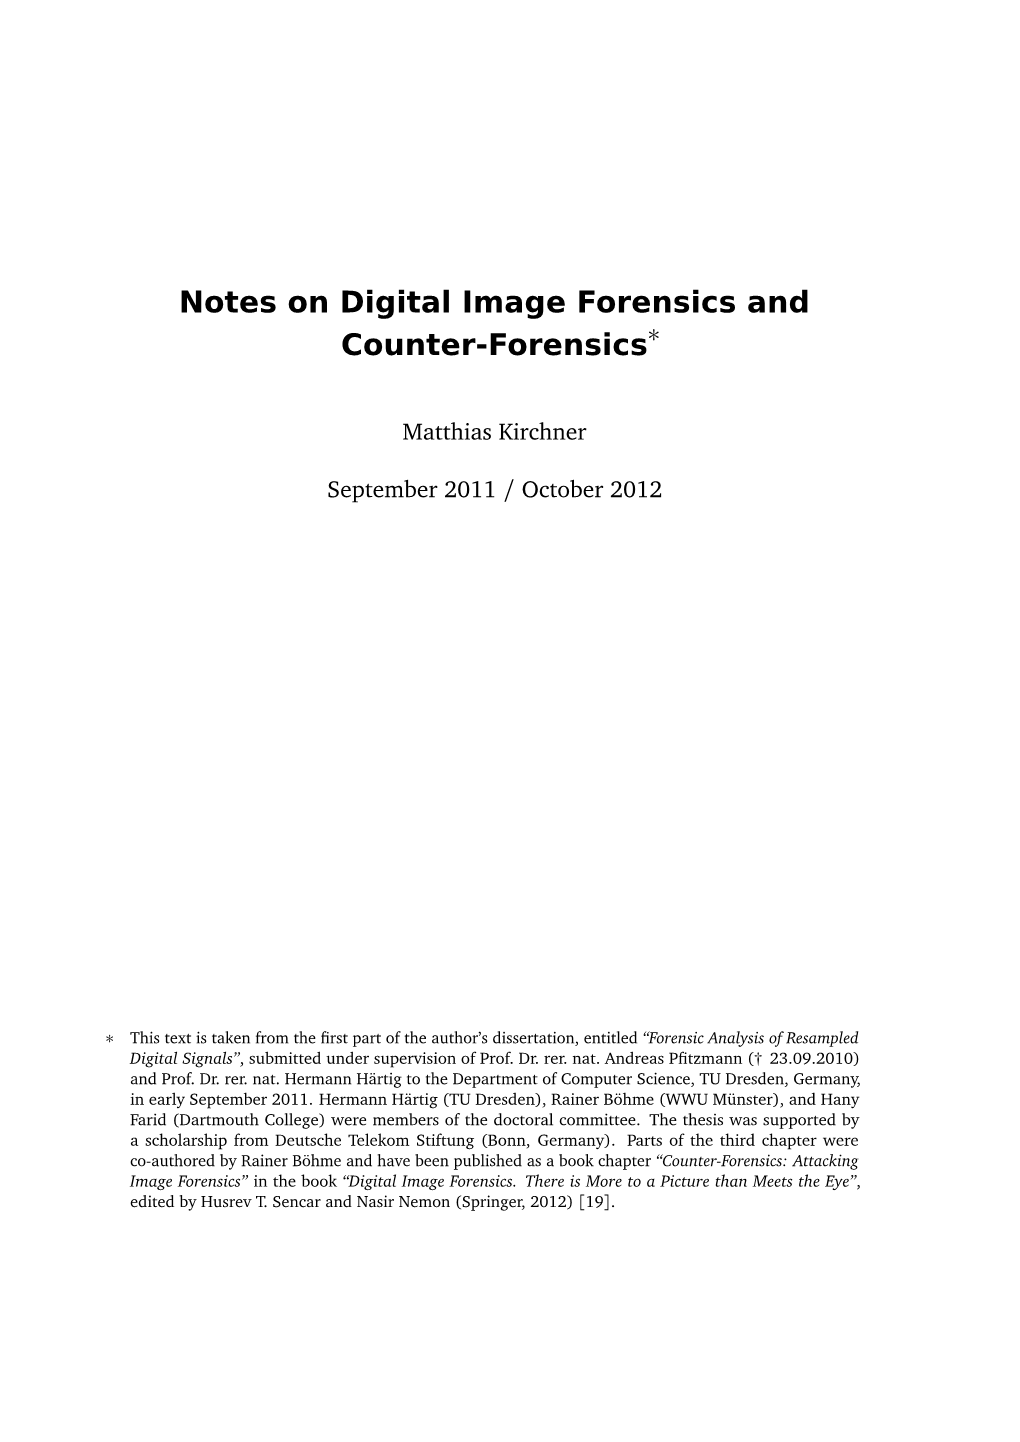 Notes on Digital Image Forensics and Counter-Forensics